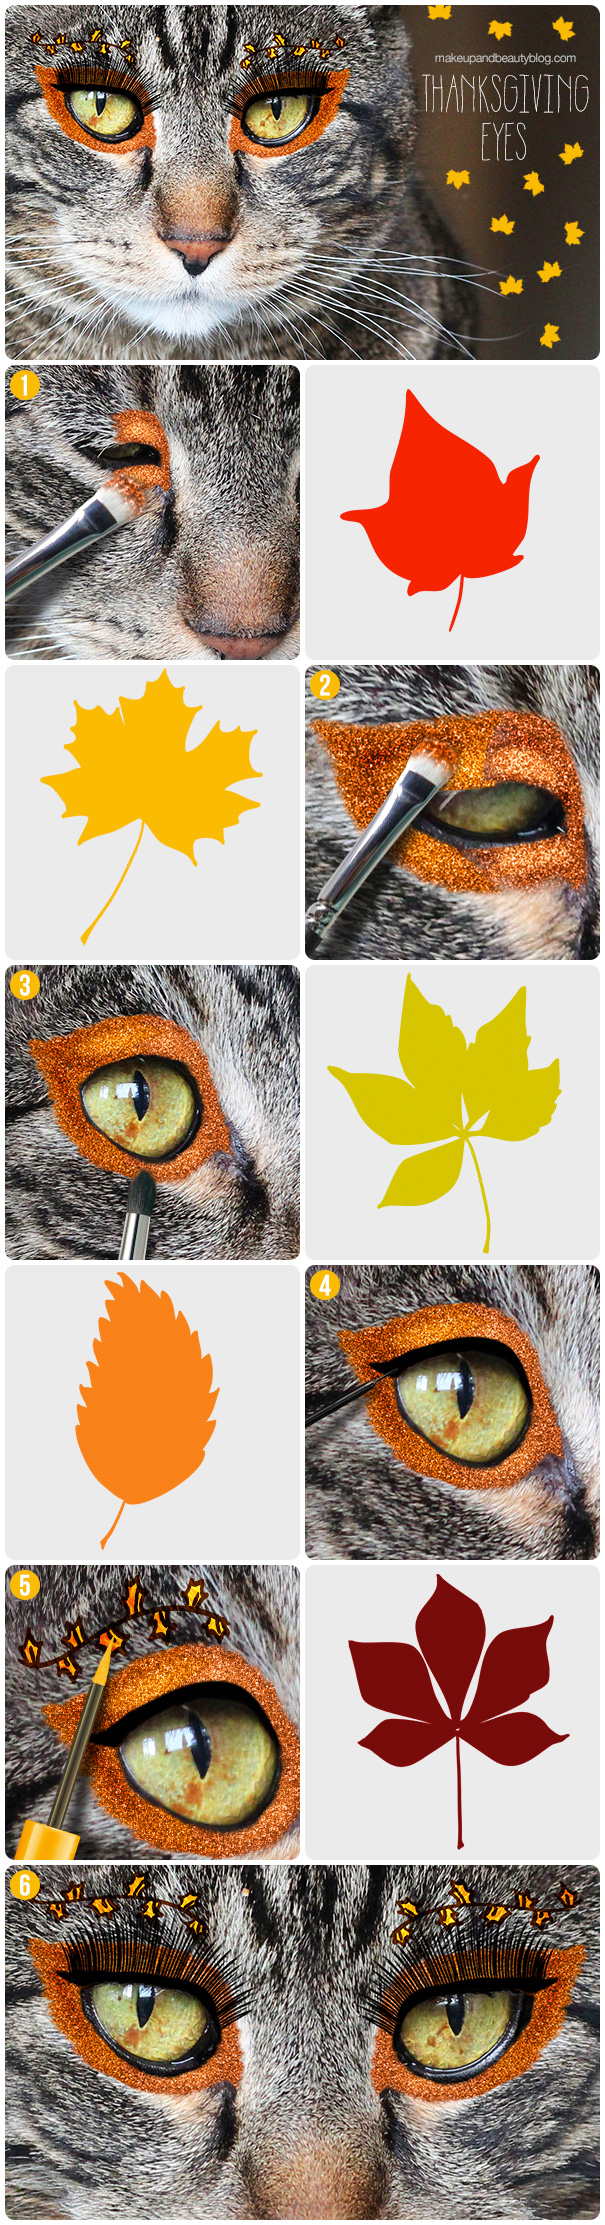 A Thanksgiving Makeup Look by Tabs the Cat